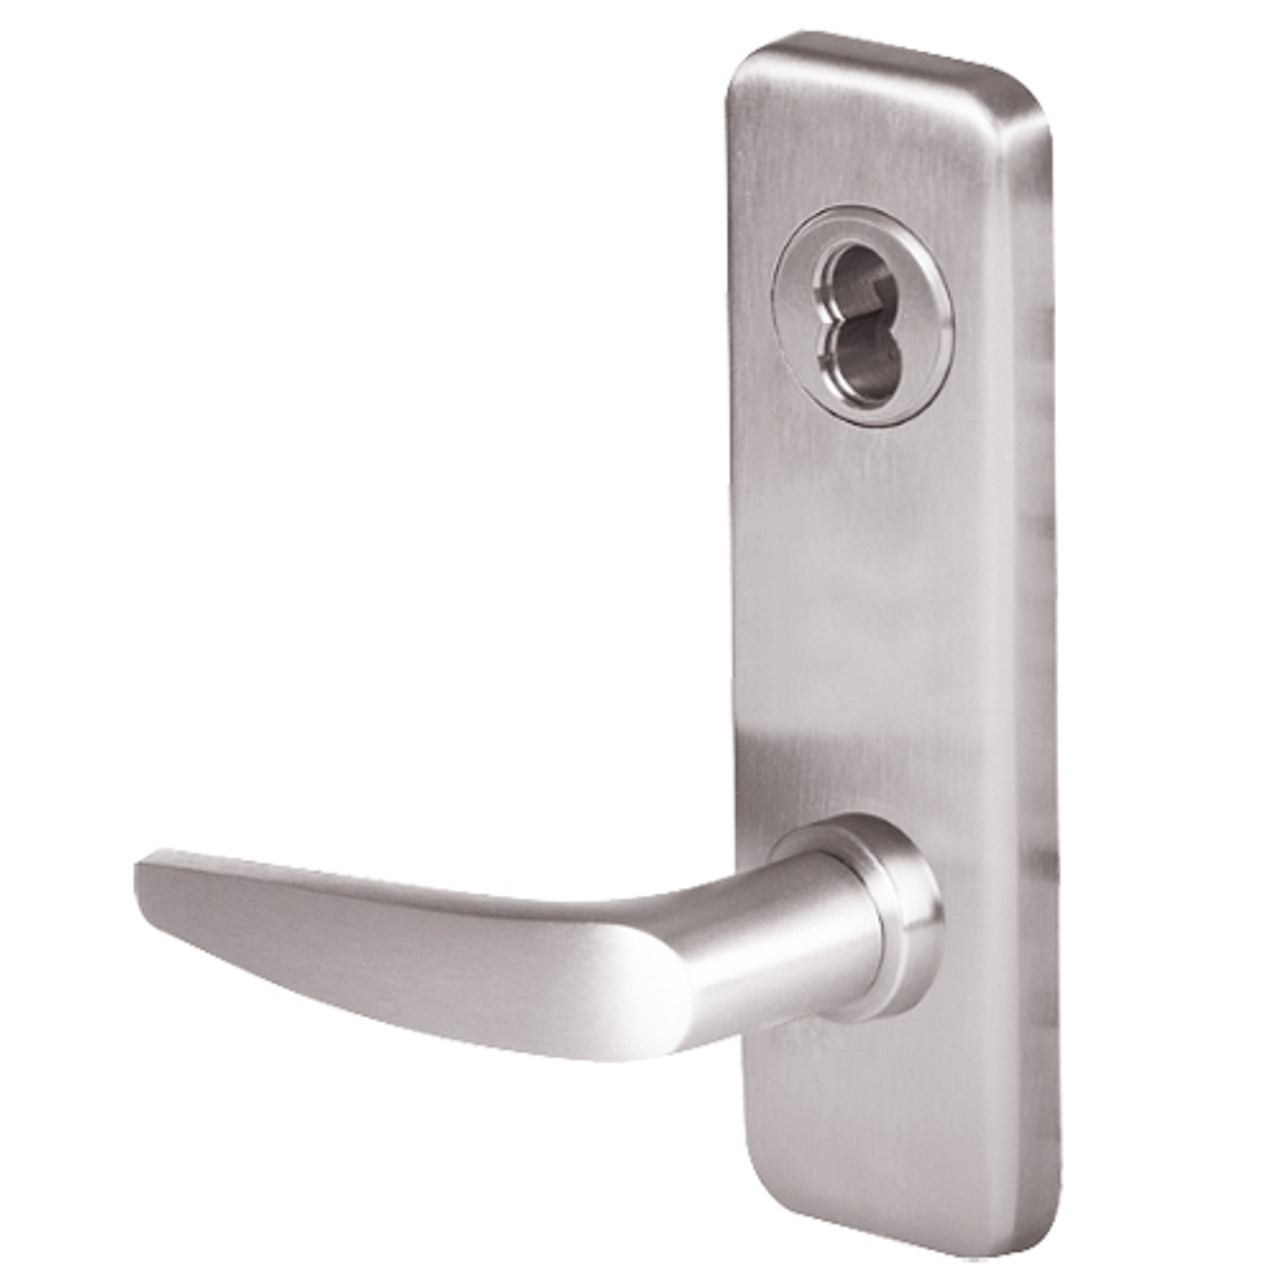 45HW7TWEL16J62912V Best 40HW series Double Key Deadbolt Fail Safe Electromechanical Mortise Lever Lock with Curved w/ No Return Style in Bright Stainless Steel